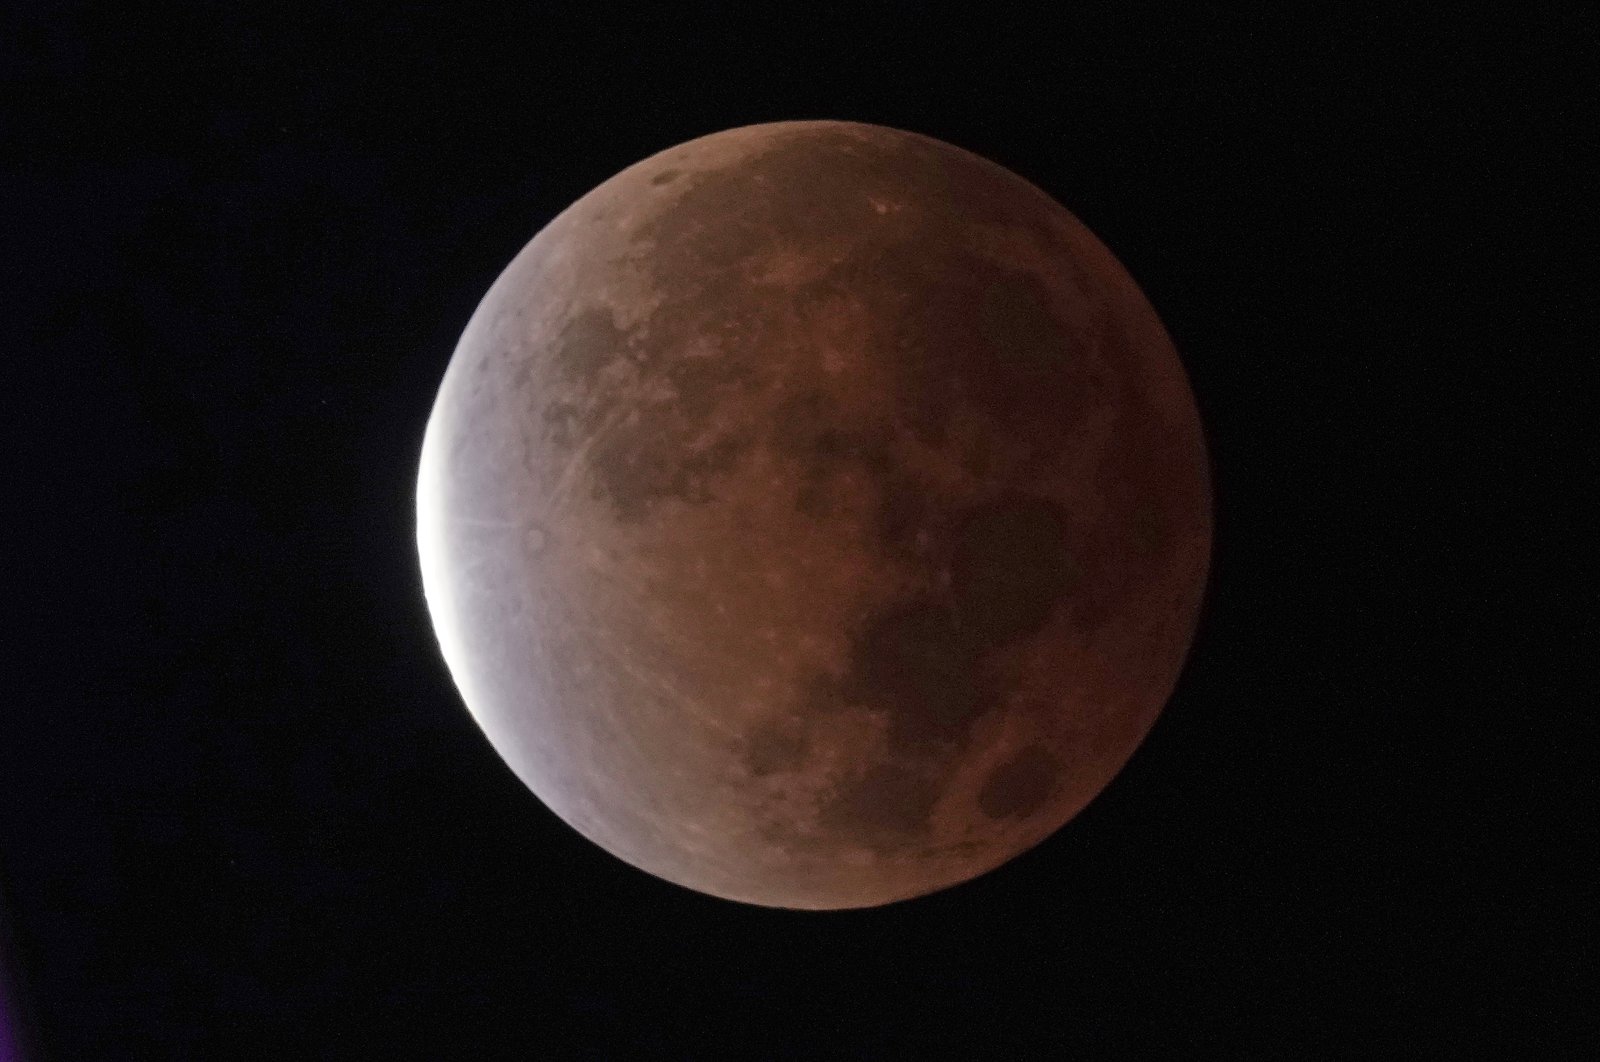 The earth&#039;s shadow covers the full moon during a partial lunar eclipse, as seen from Kansas City, Missouri, U.S., Nov. 19, 2021. (AP Photo)